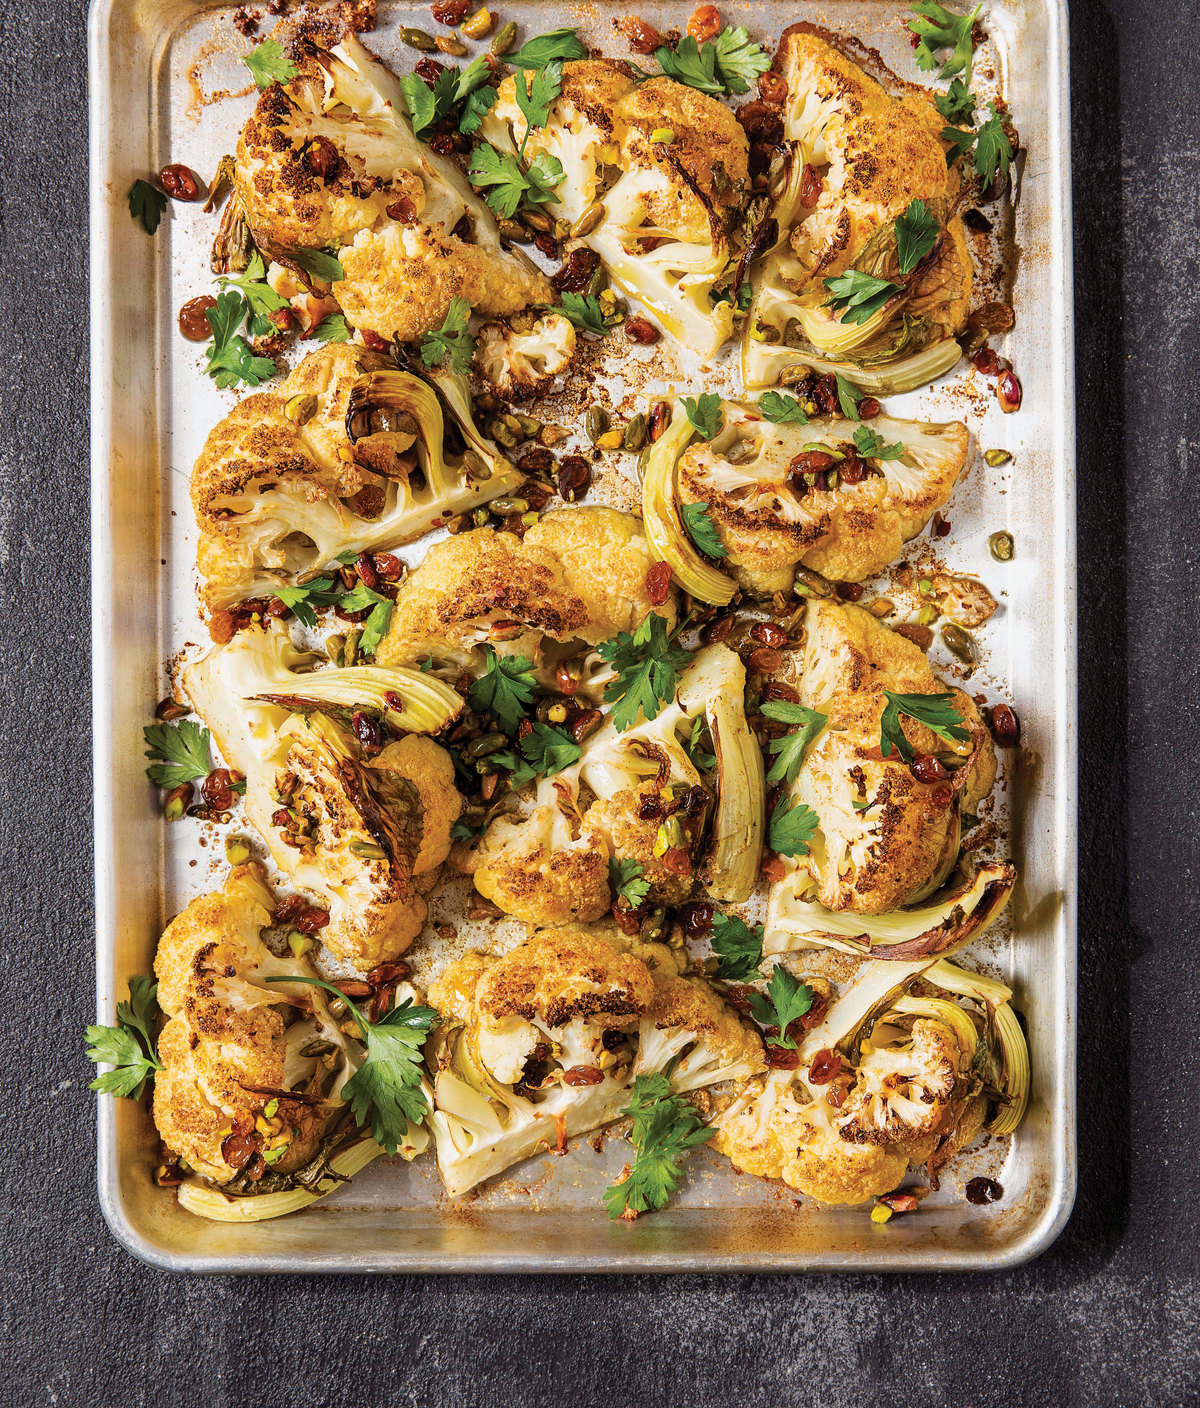 Roasted cauliflower with pistachios and golden raisins